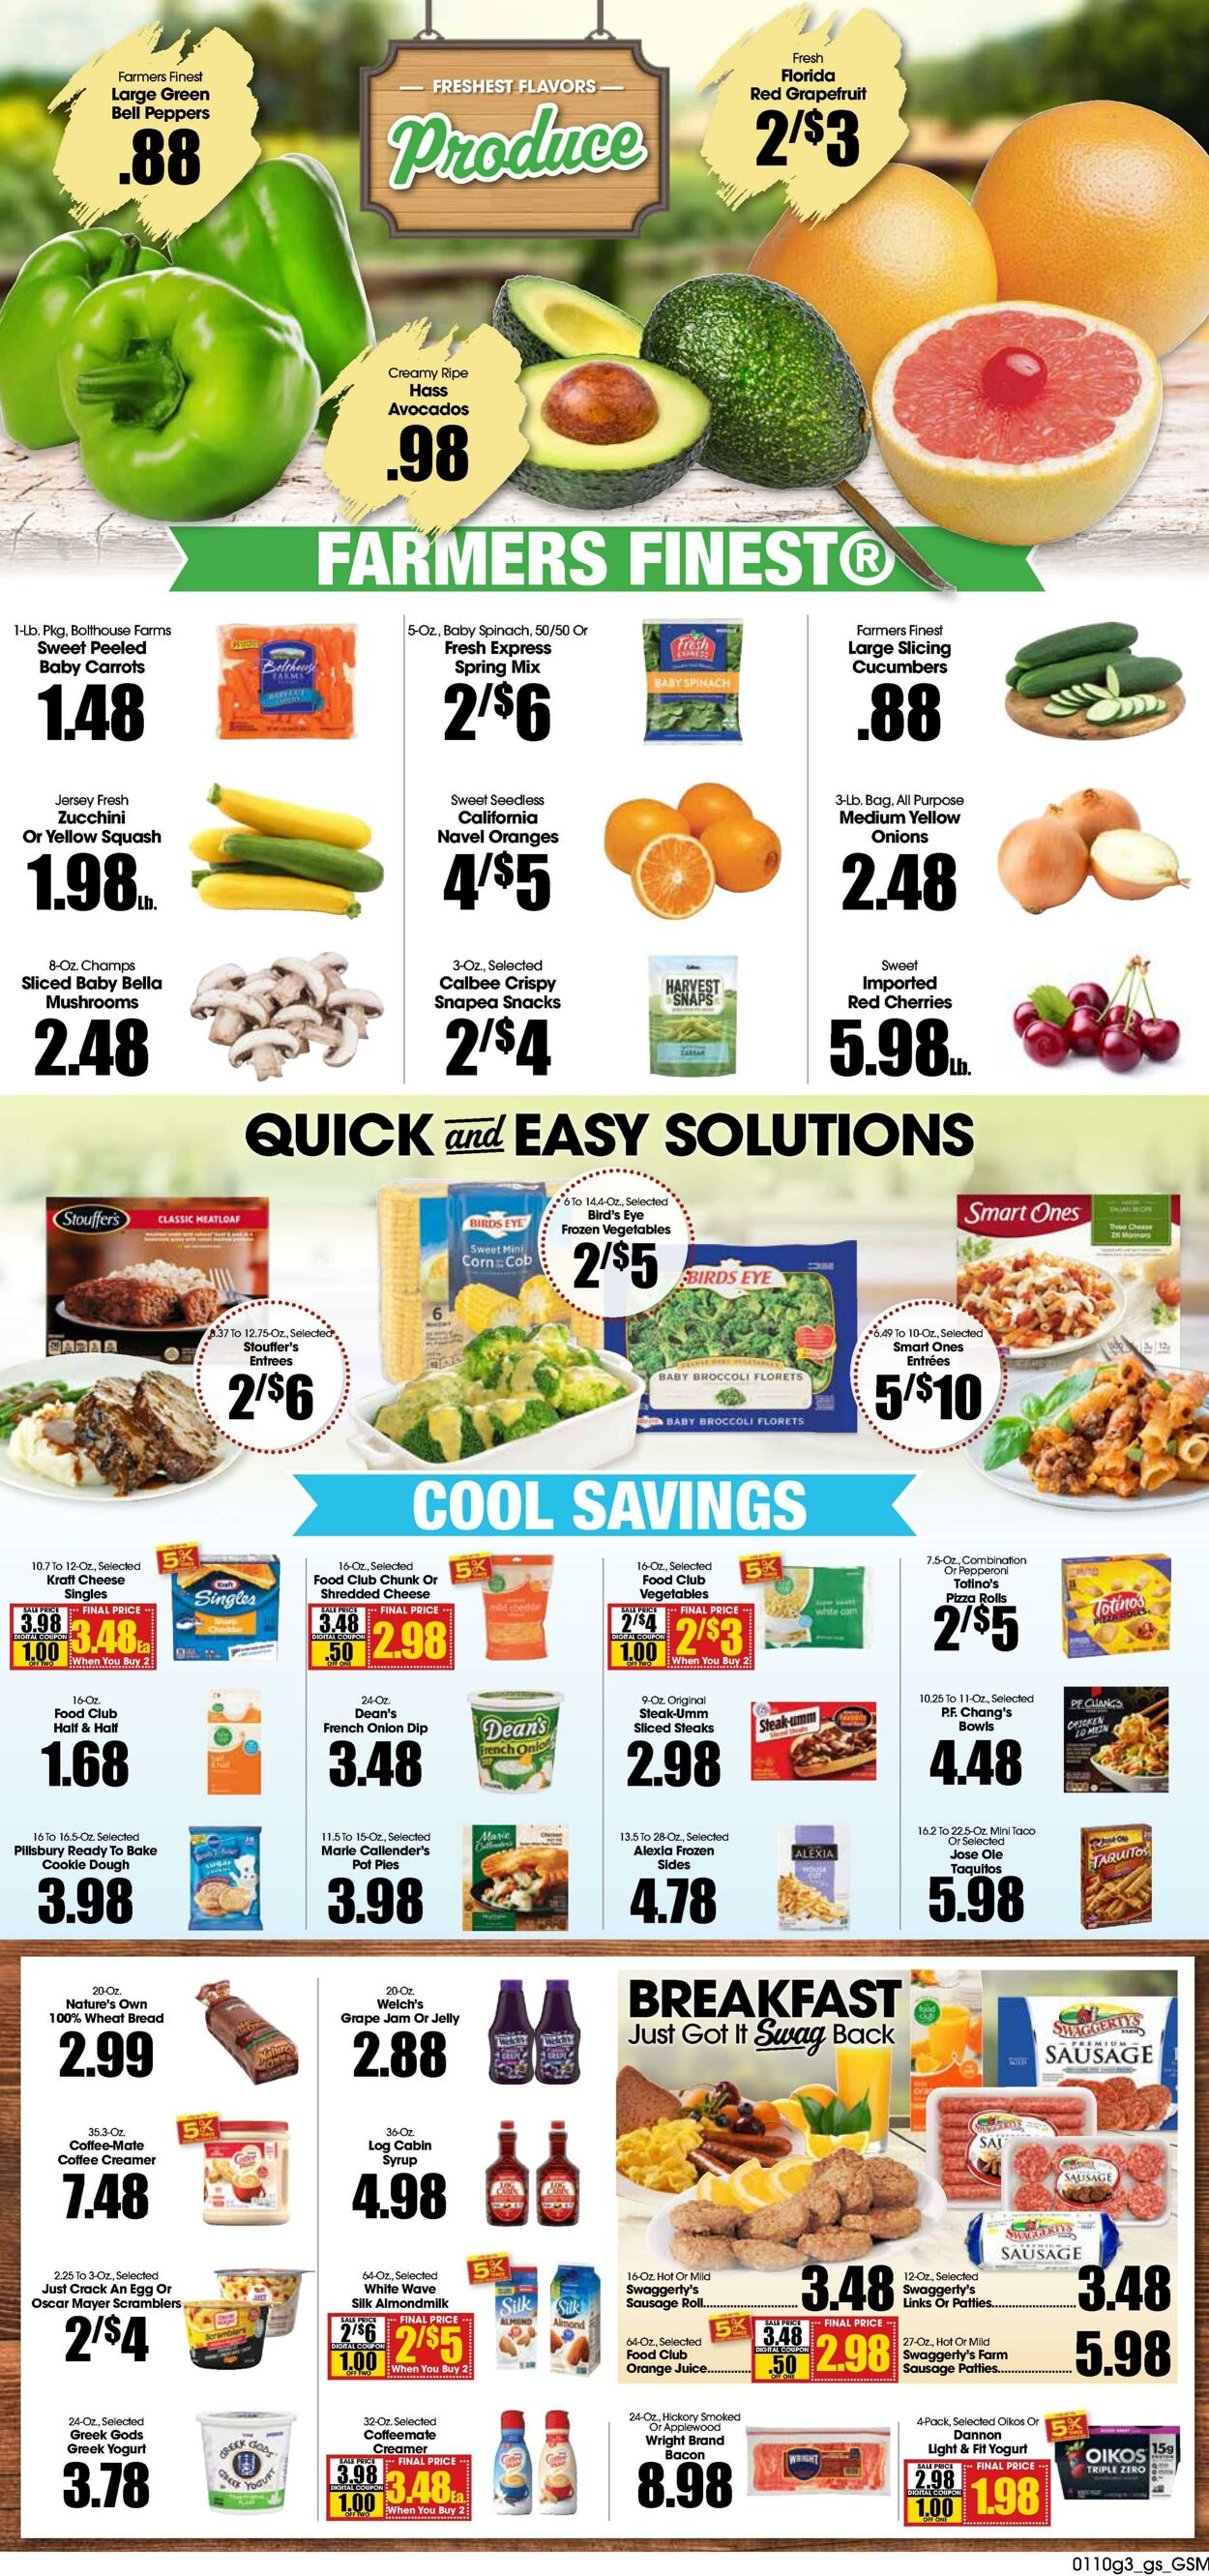 Weekly ad Grant's Supermarkets 01/10/2024 - 01/16/2024